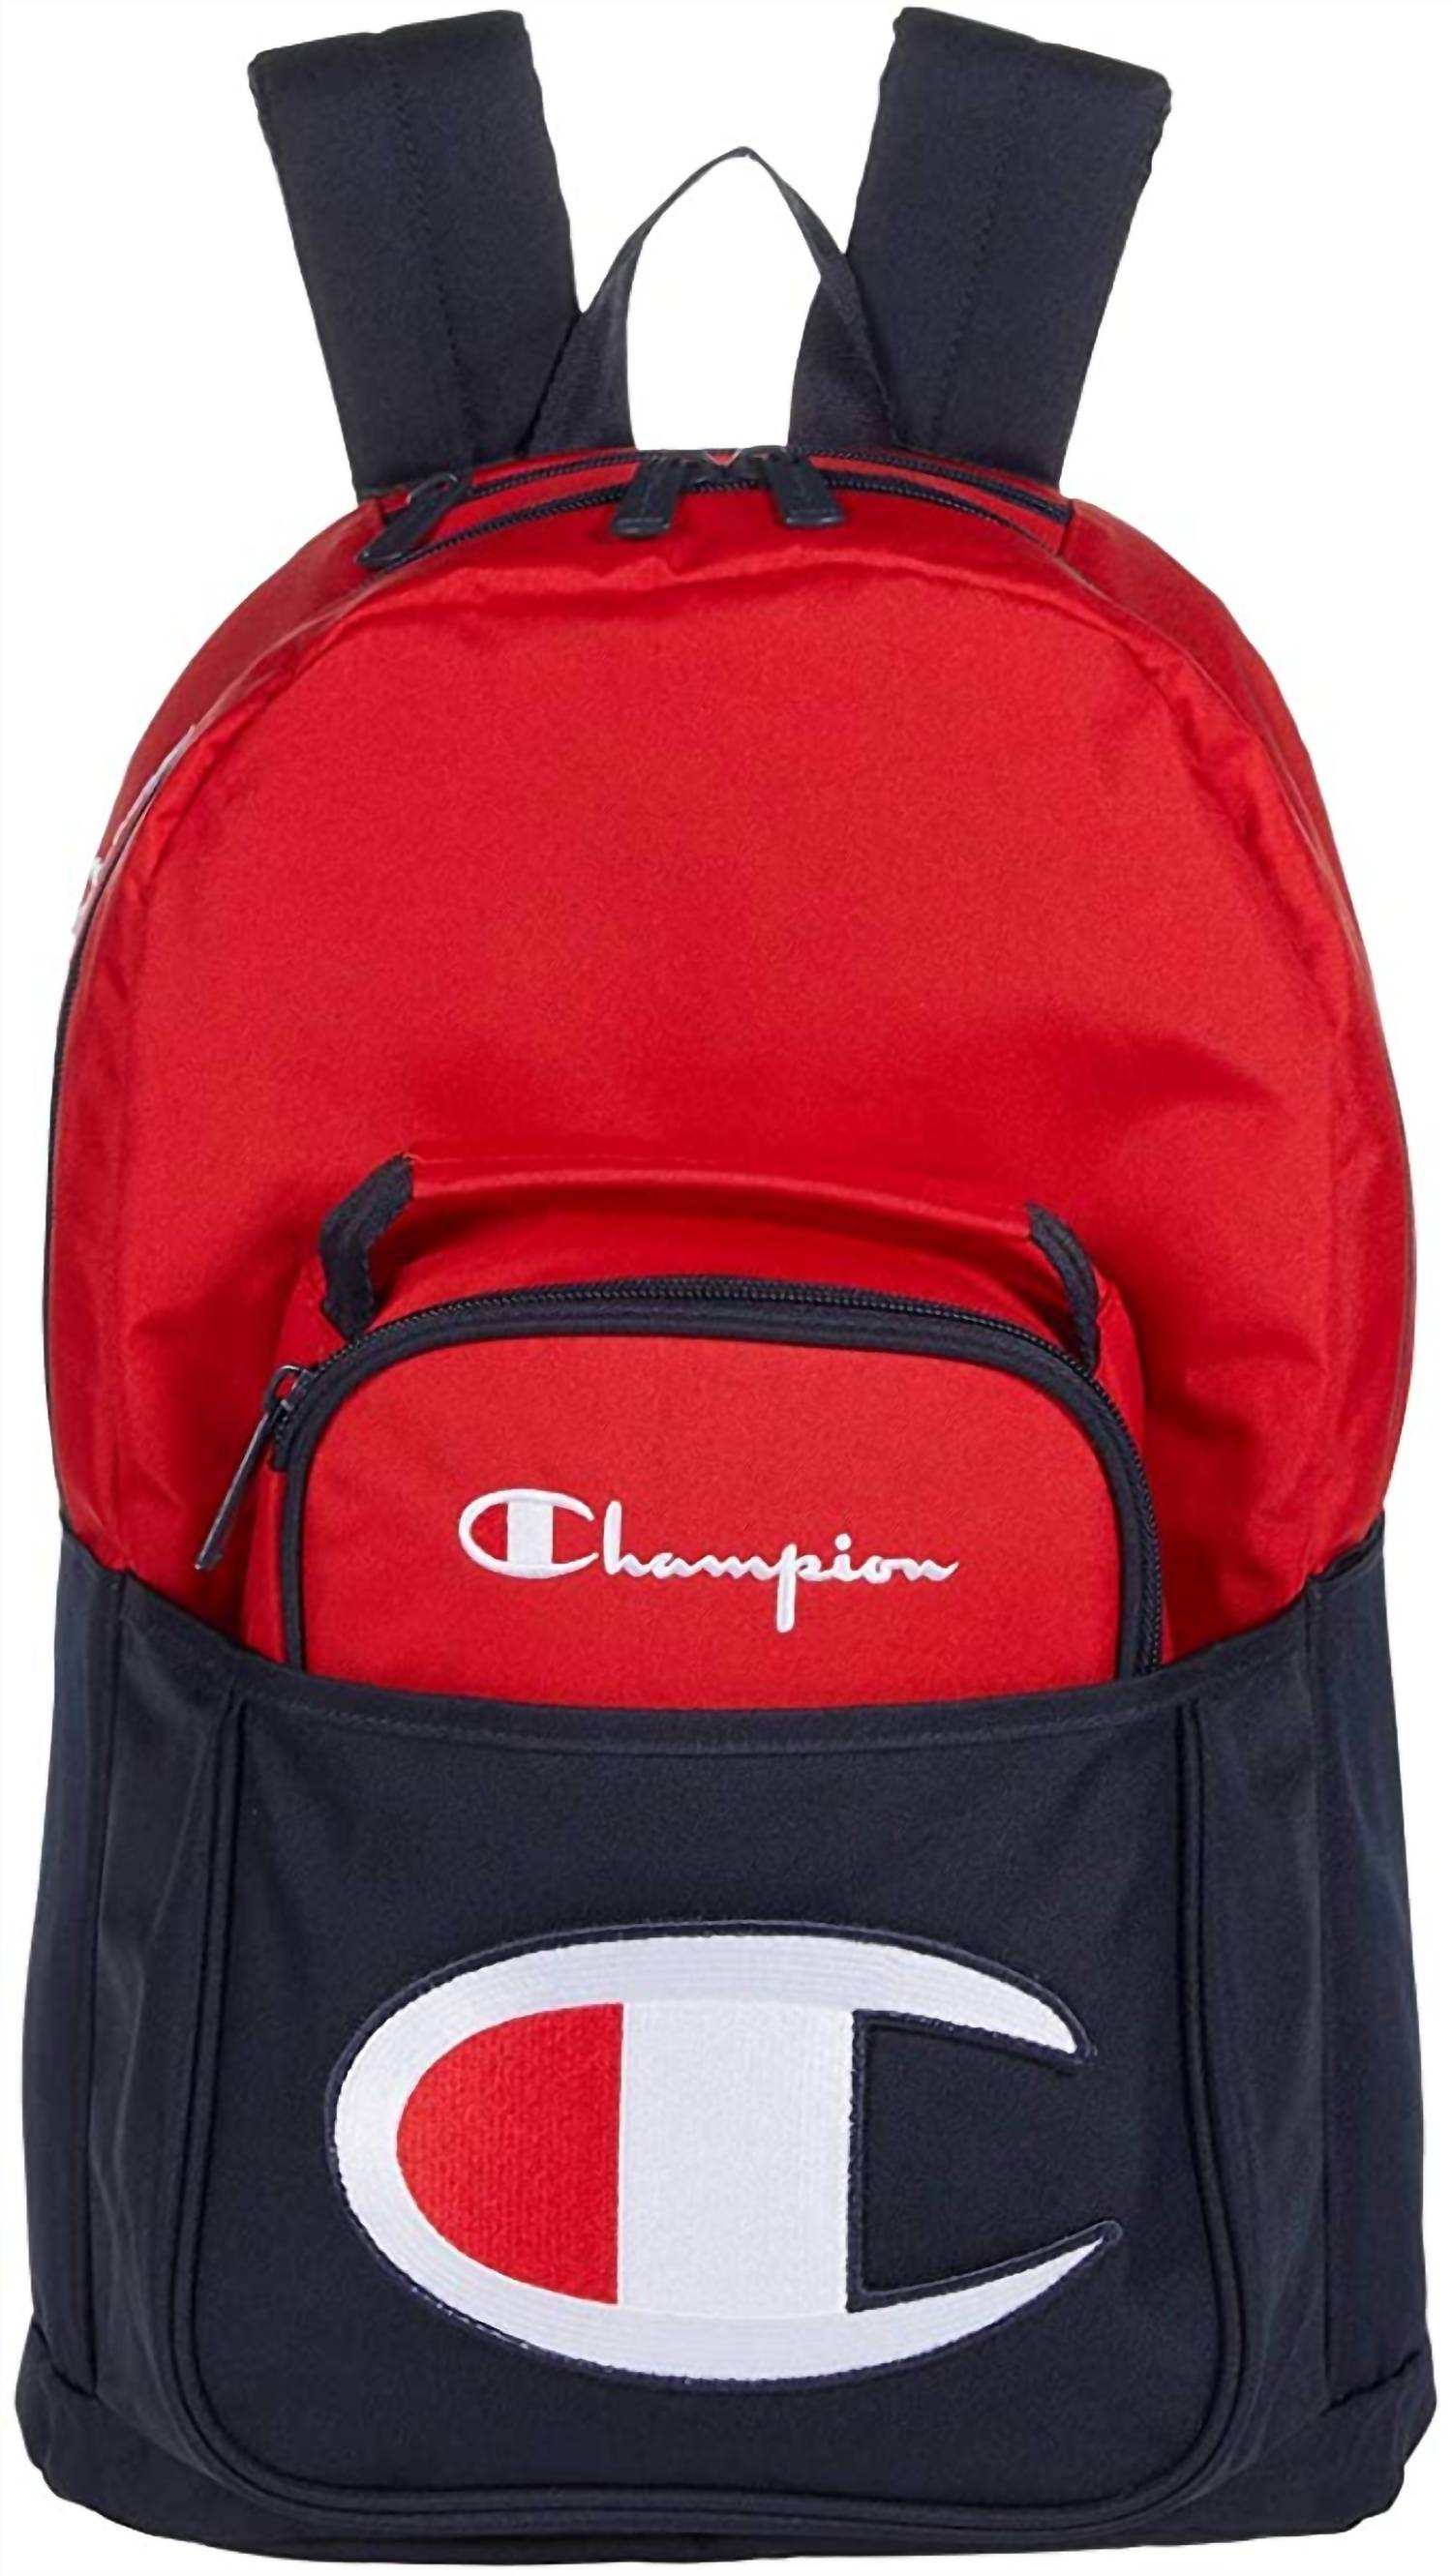 Champion - Youth Backpack with Removable Lunch Kit